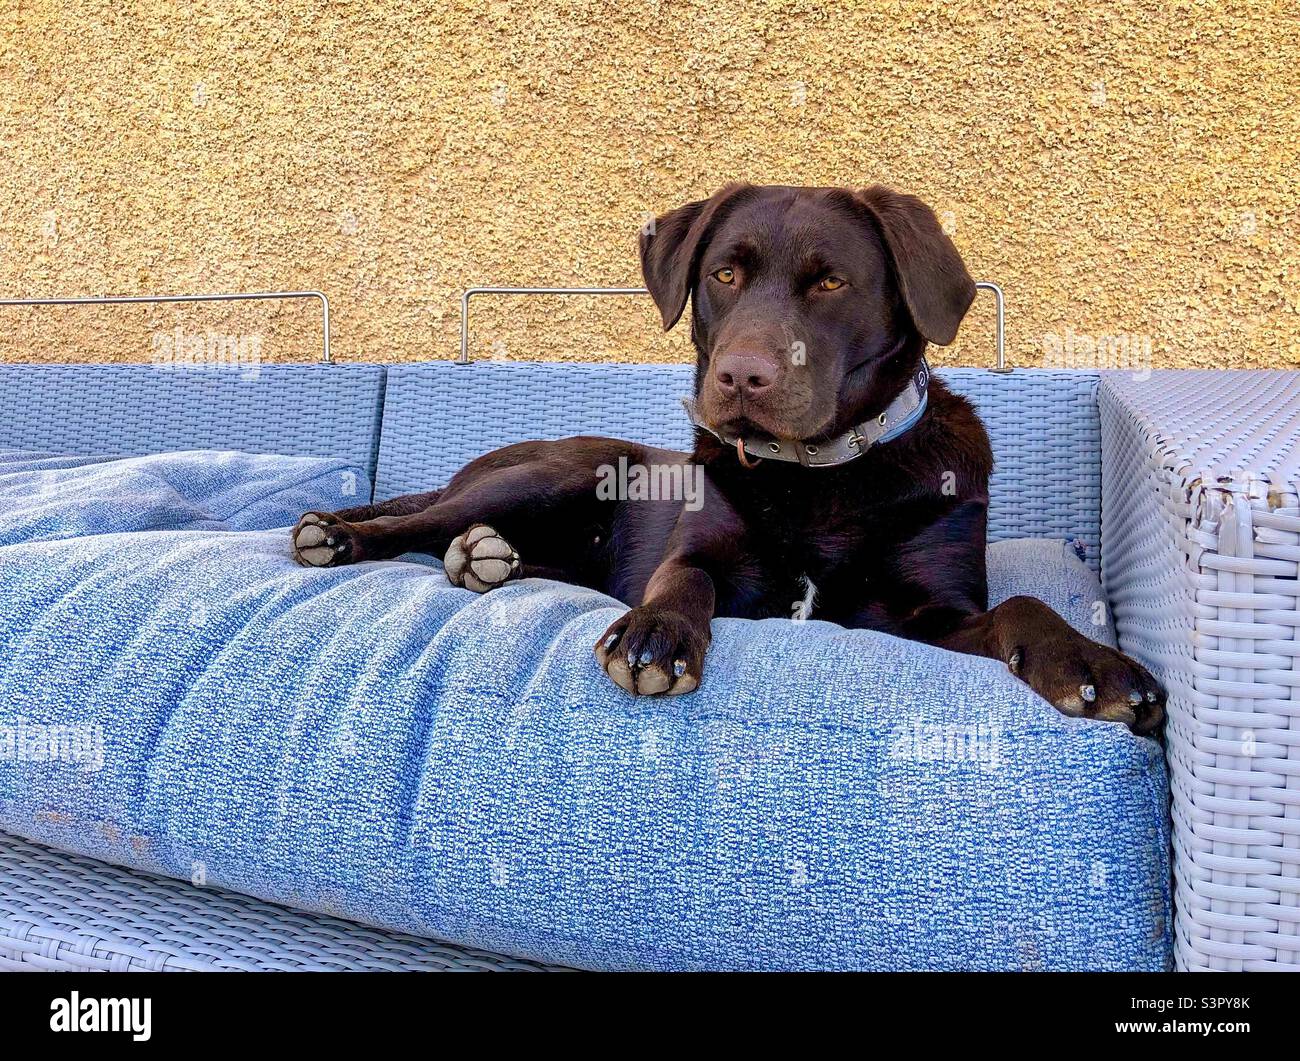 Chocolate brown Labrador relaxing on couch. Stock Photo